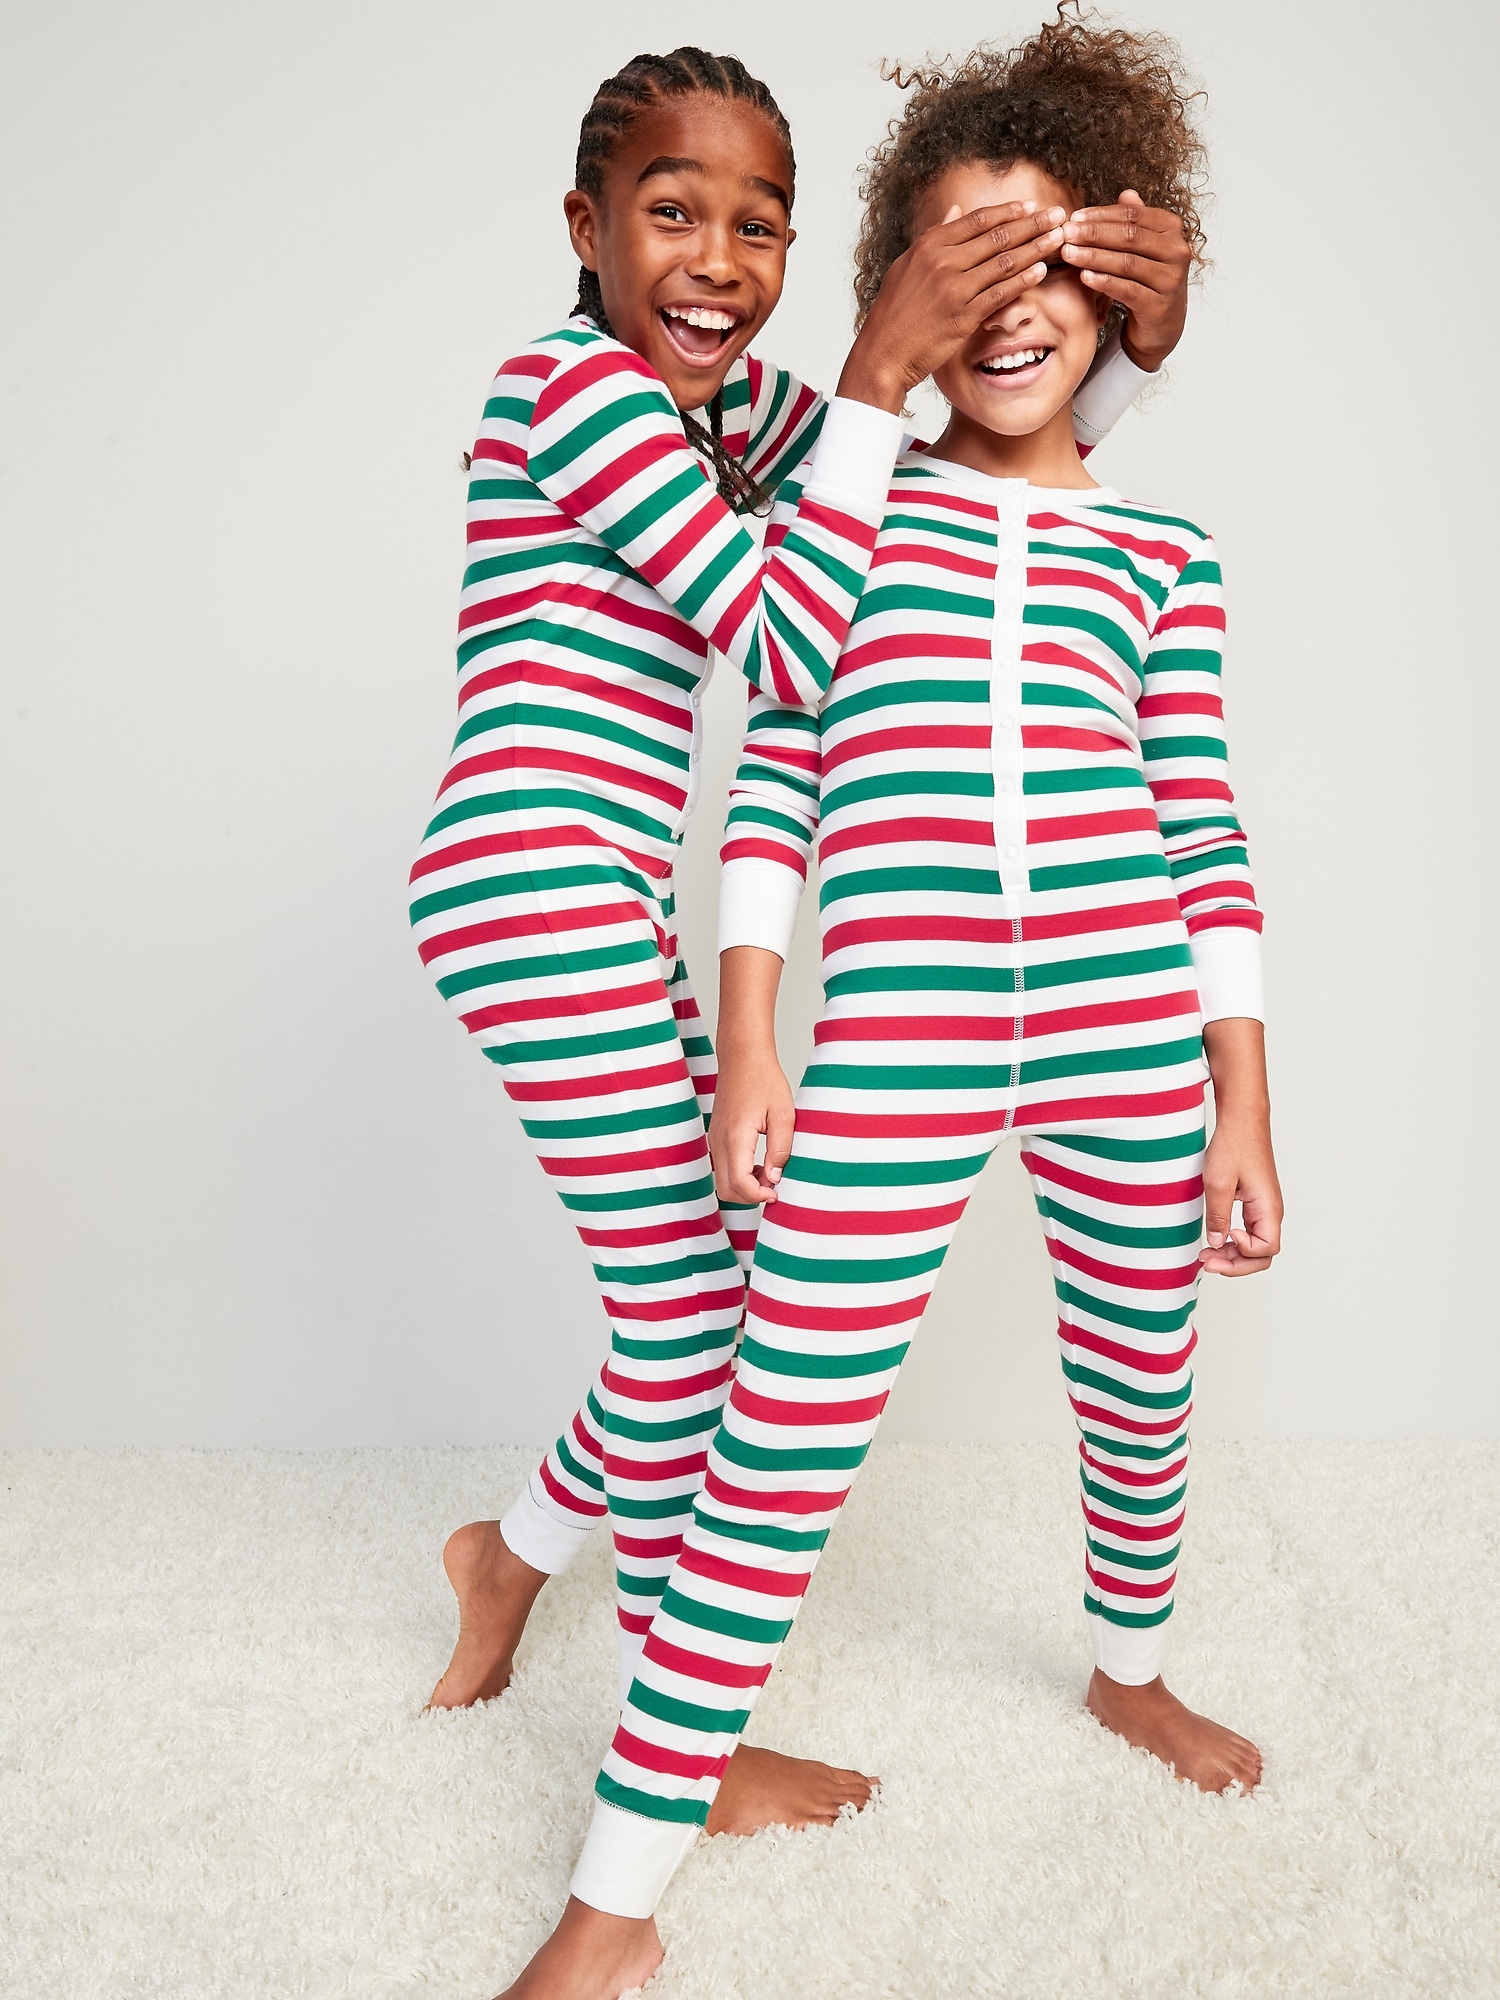 Old Navy Gender-Neutral Matching Print Snug-Fit One-Piece Pajamas for Kids multi. 1